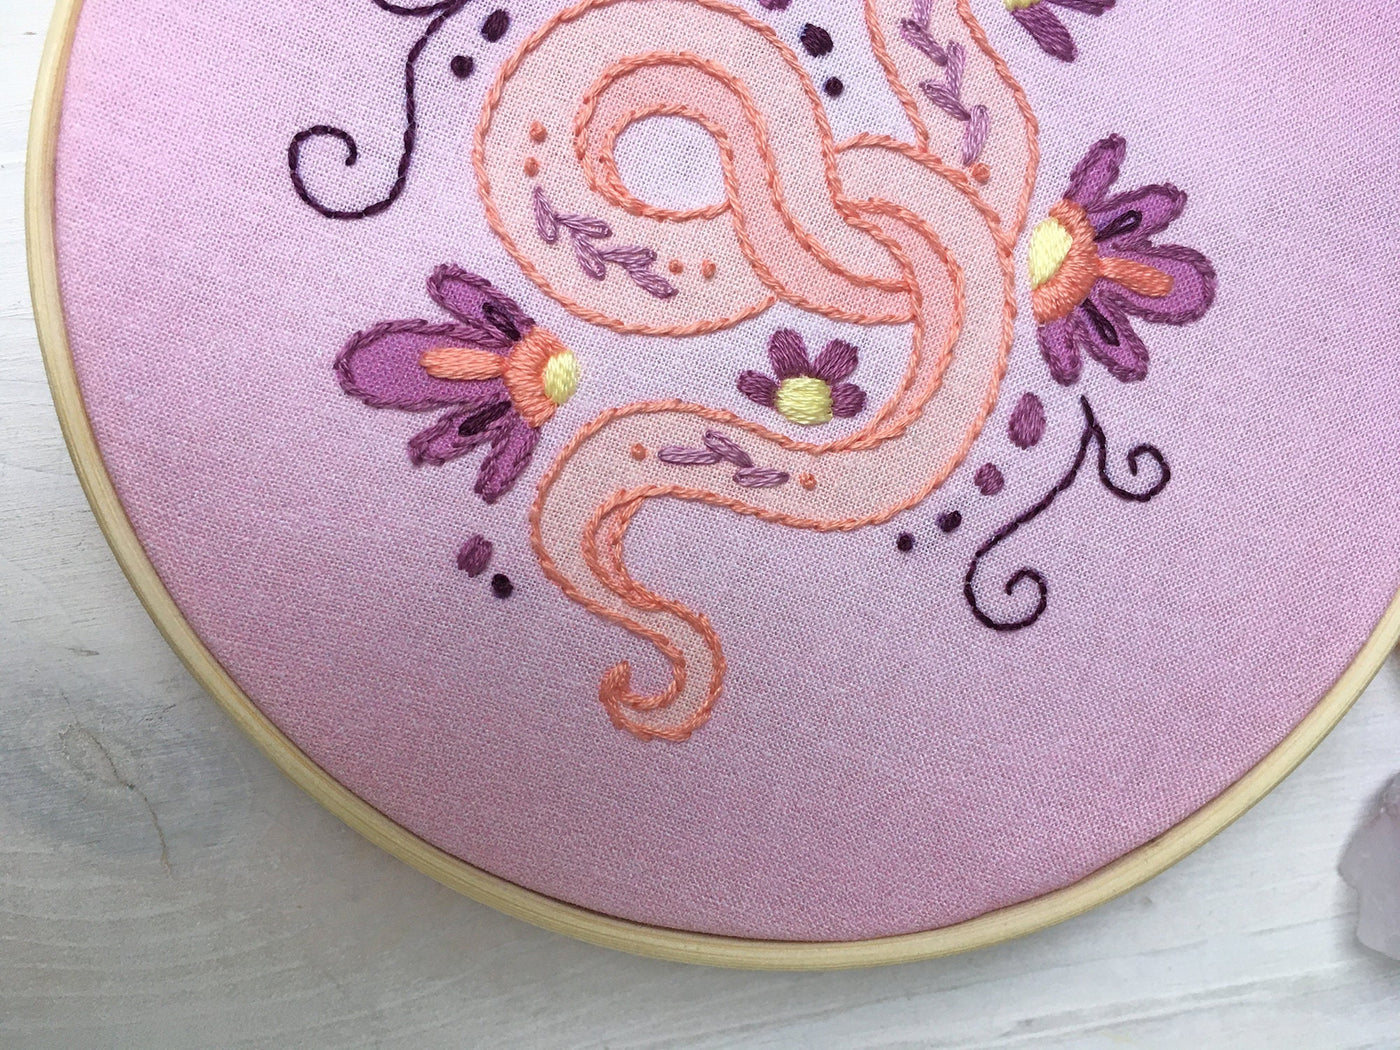 Snake and Flowers Hand Embroidery fabric sampler